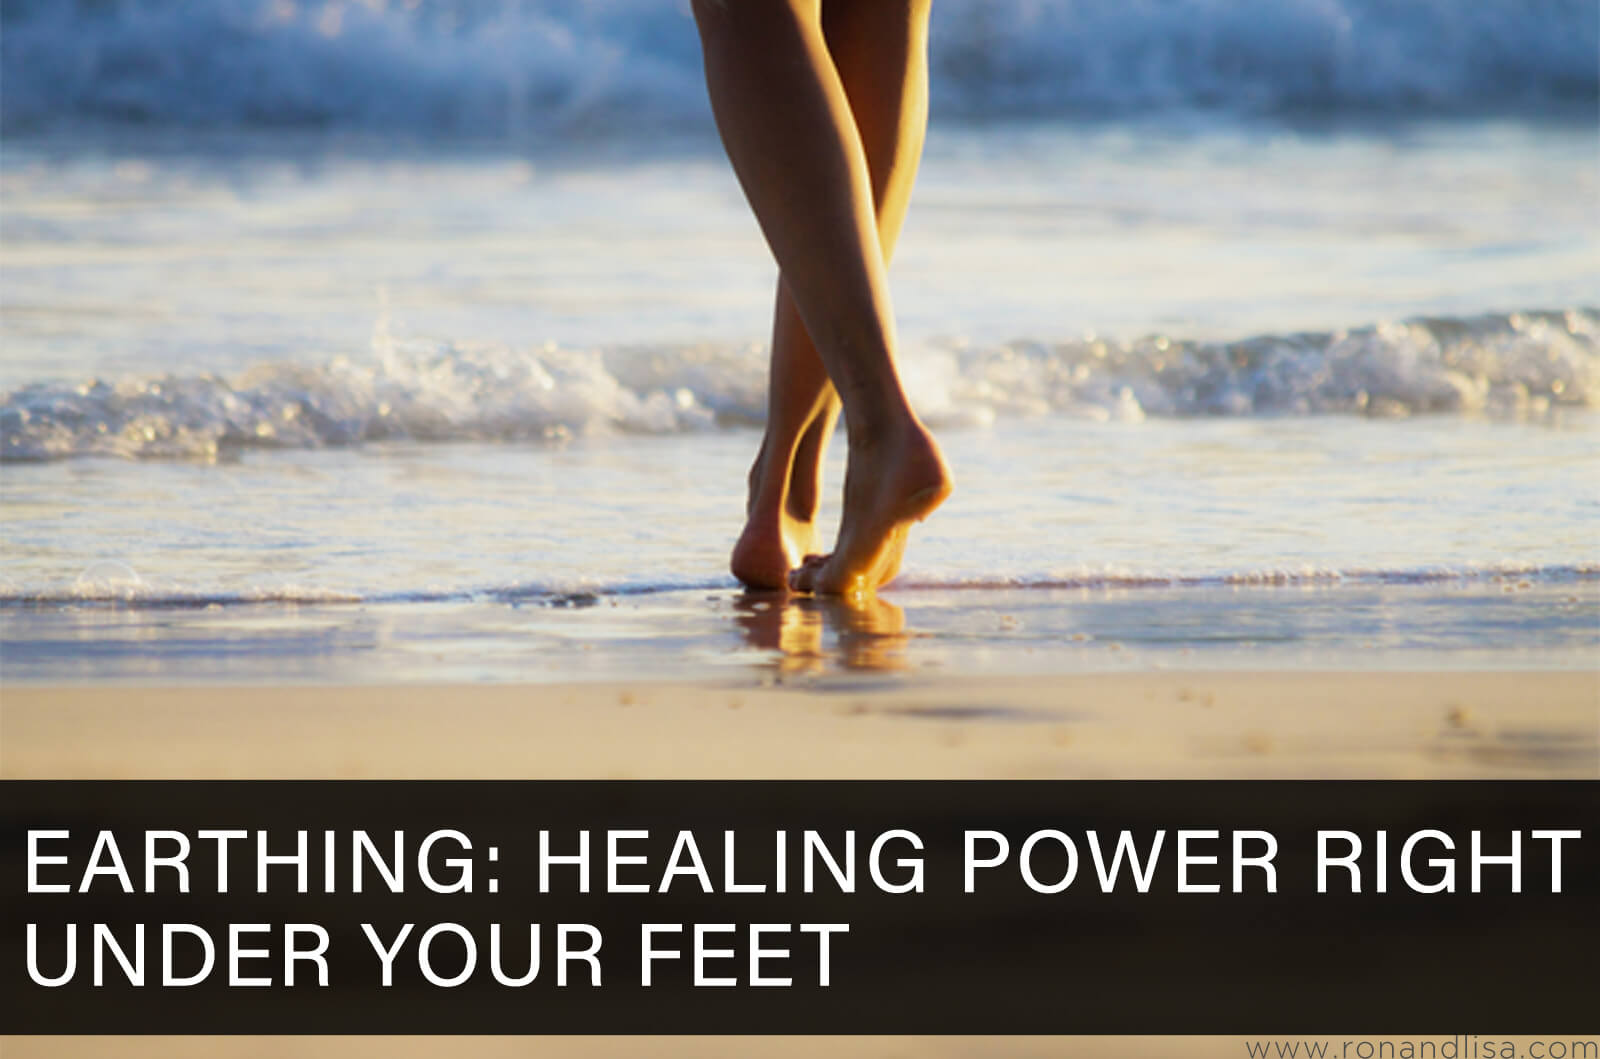 Earthing: Healing Power Right Under Your Feet